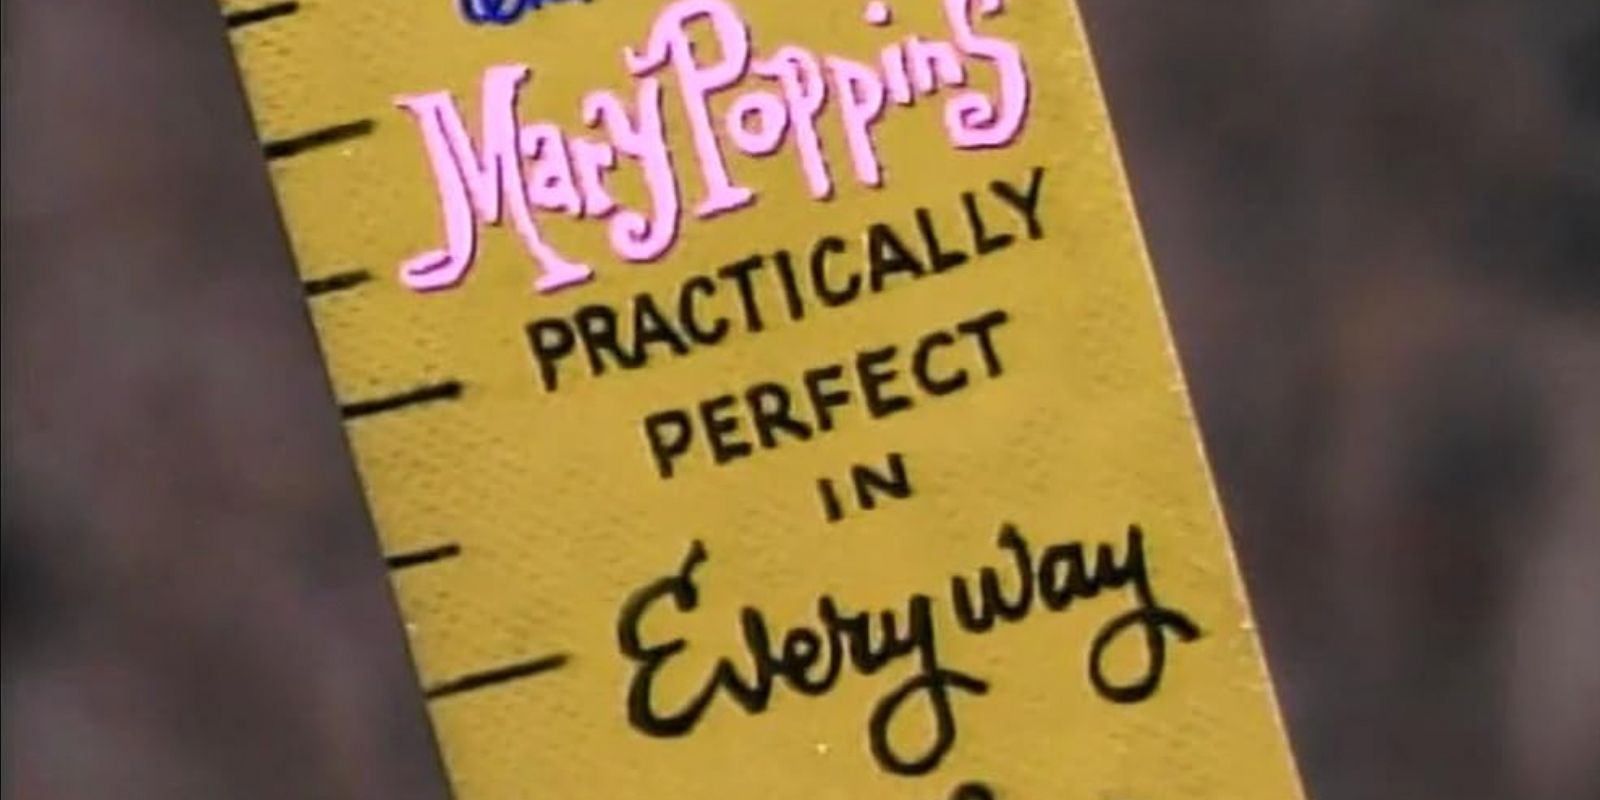 The tape measure in Mary Poppins